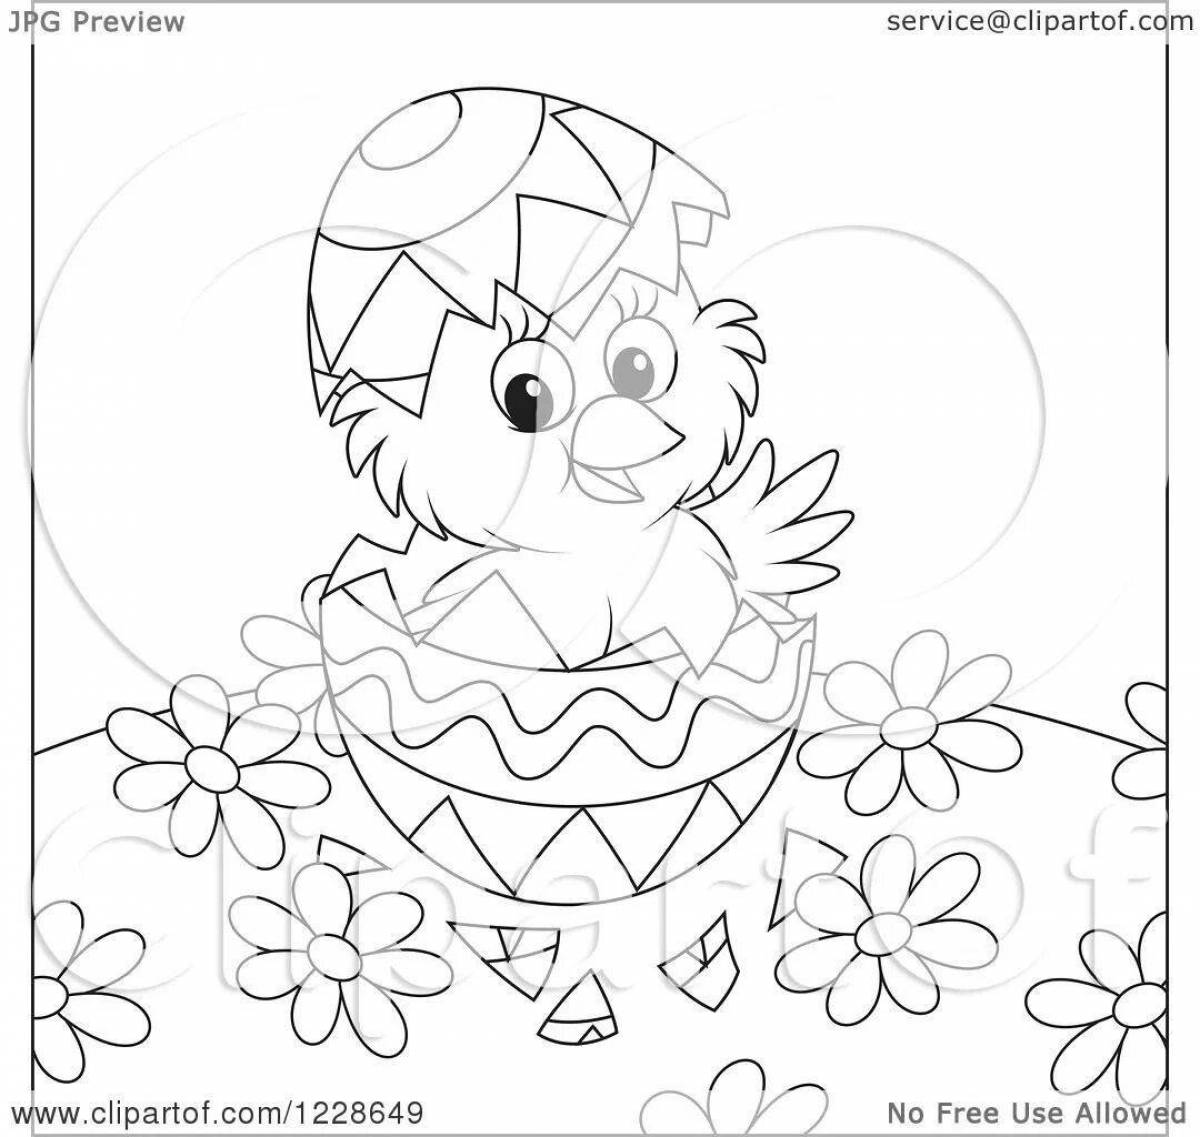 Attractive chick in shell coloring book